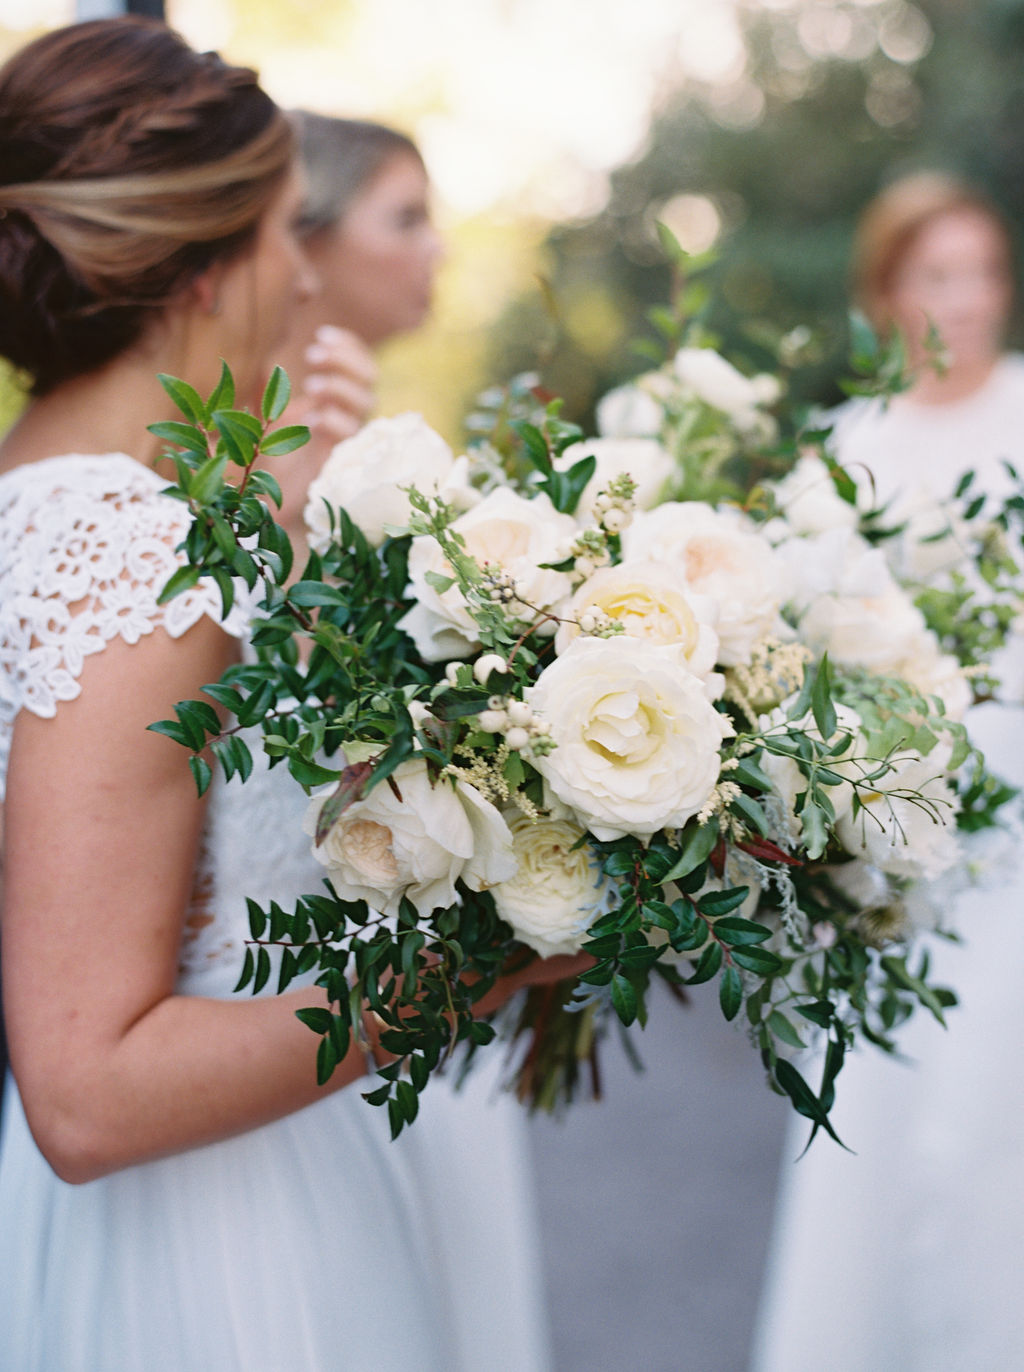 All white bridesmaid dresses with white flowers and greenery. Nashville Wedding Floral Design.